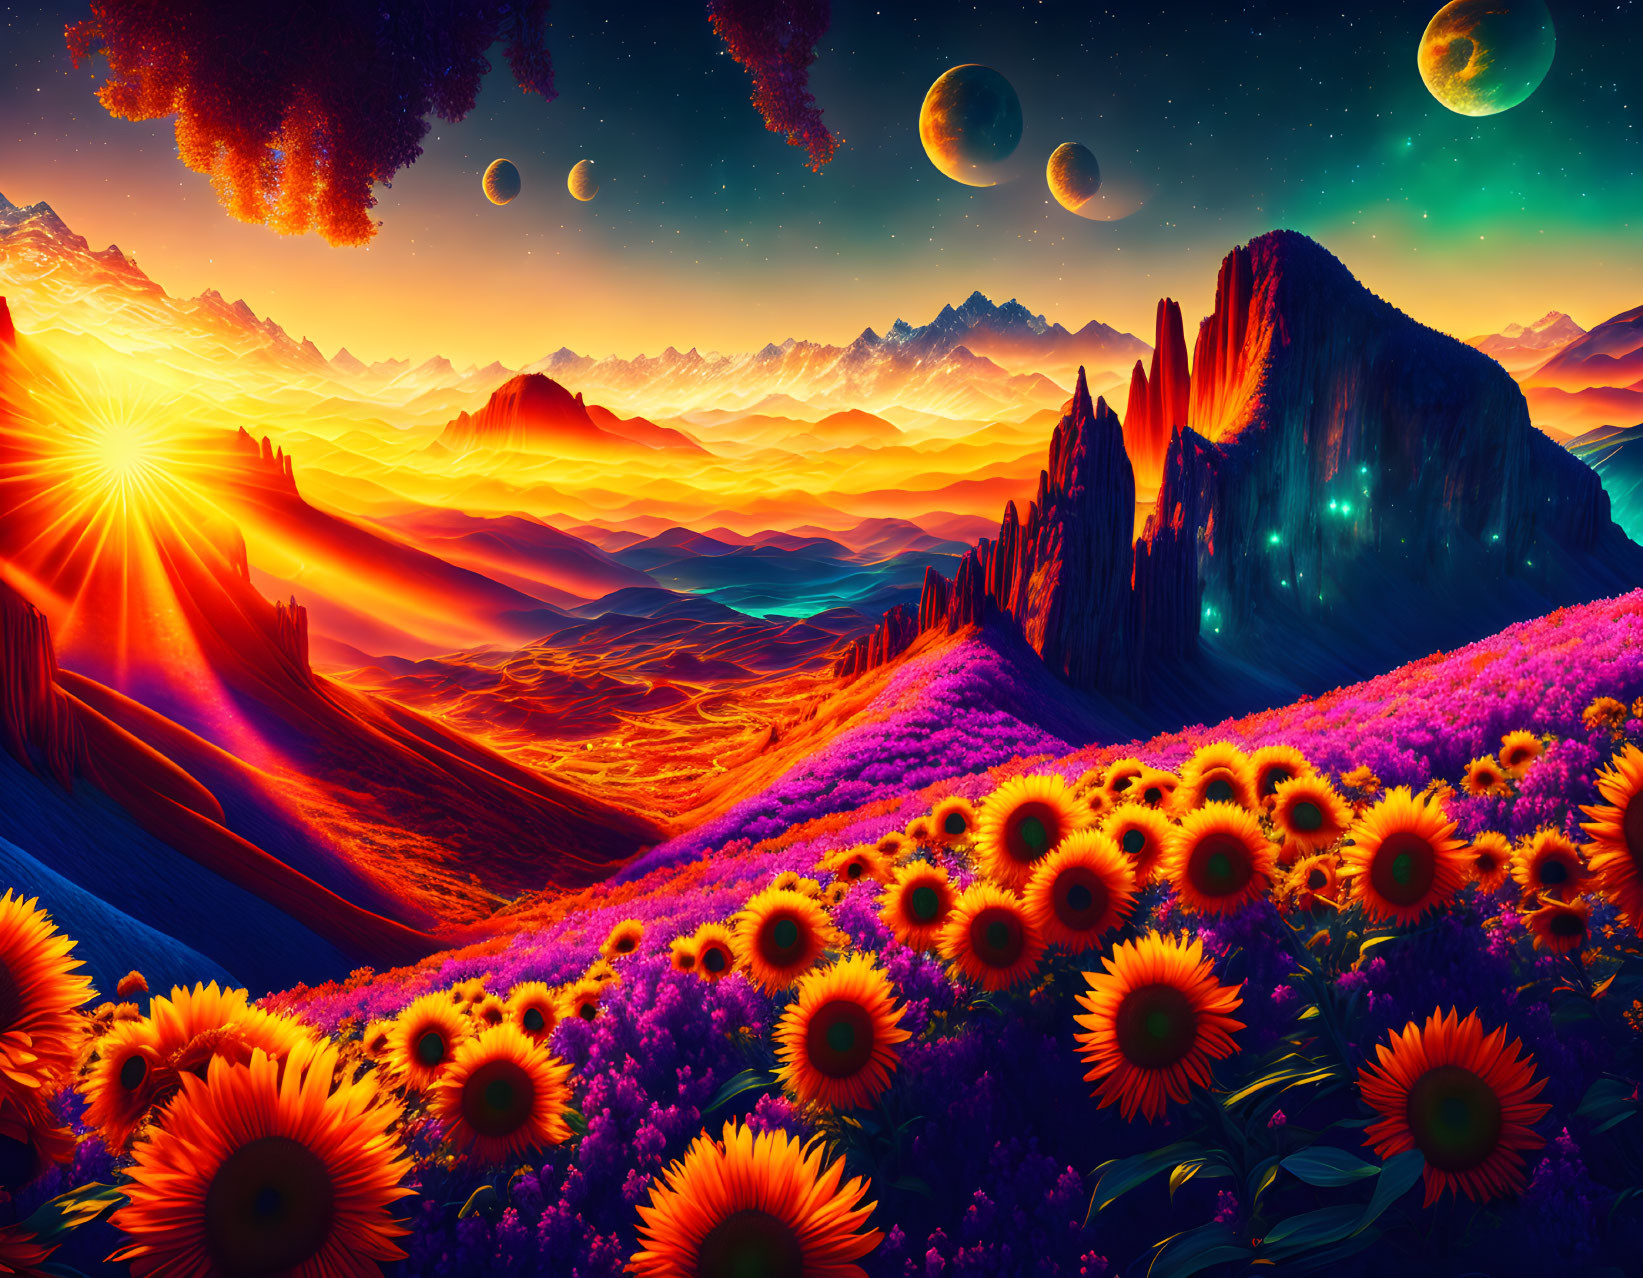 Colorful Landscape with Sunflowers, Mountains, Cave, and Planets at Sunset